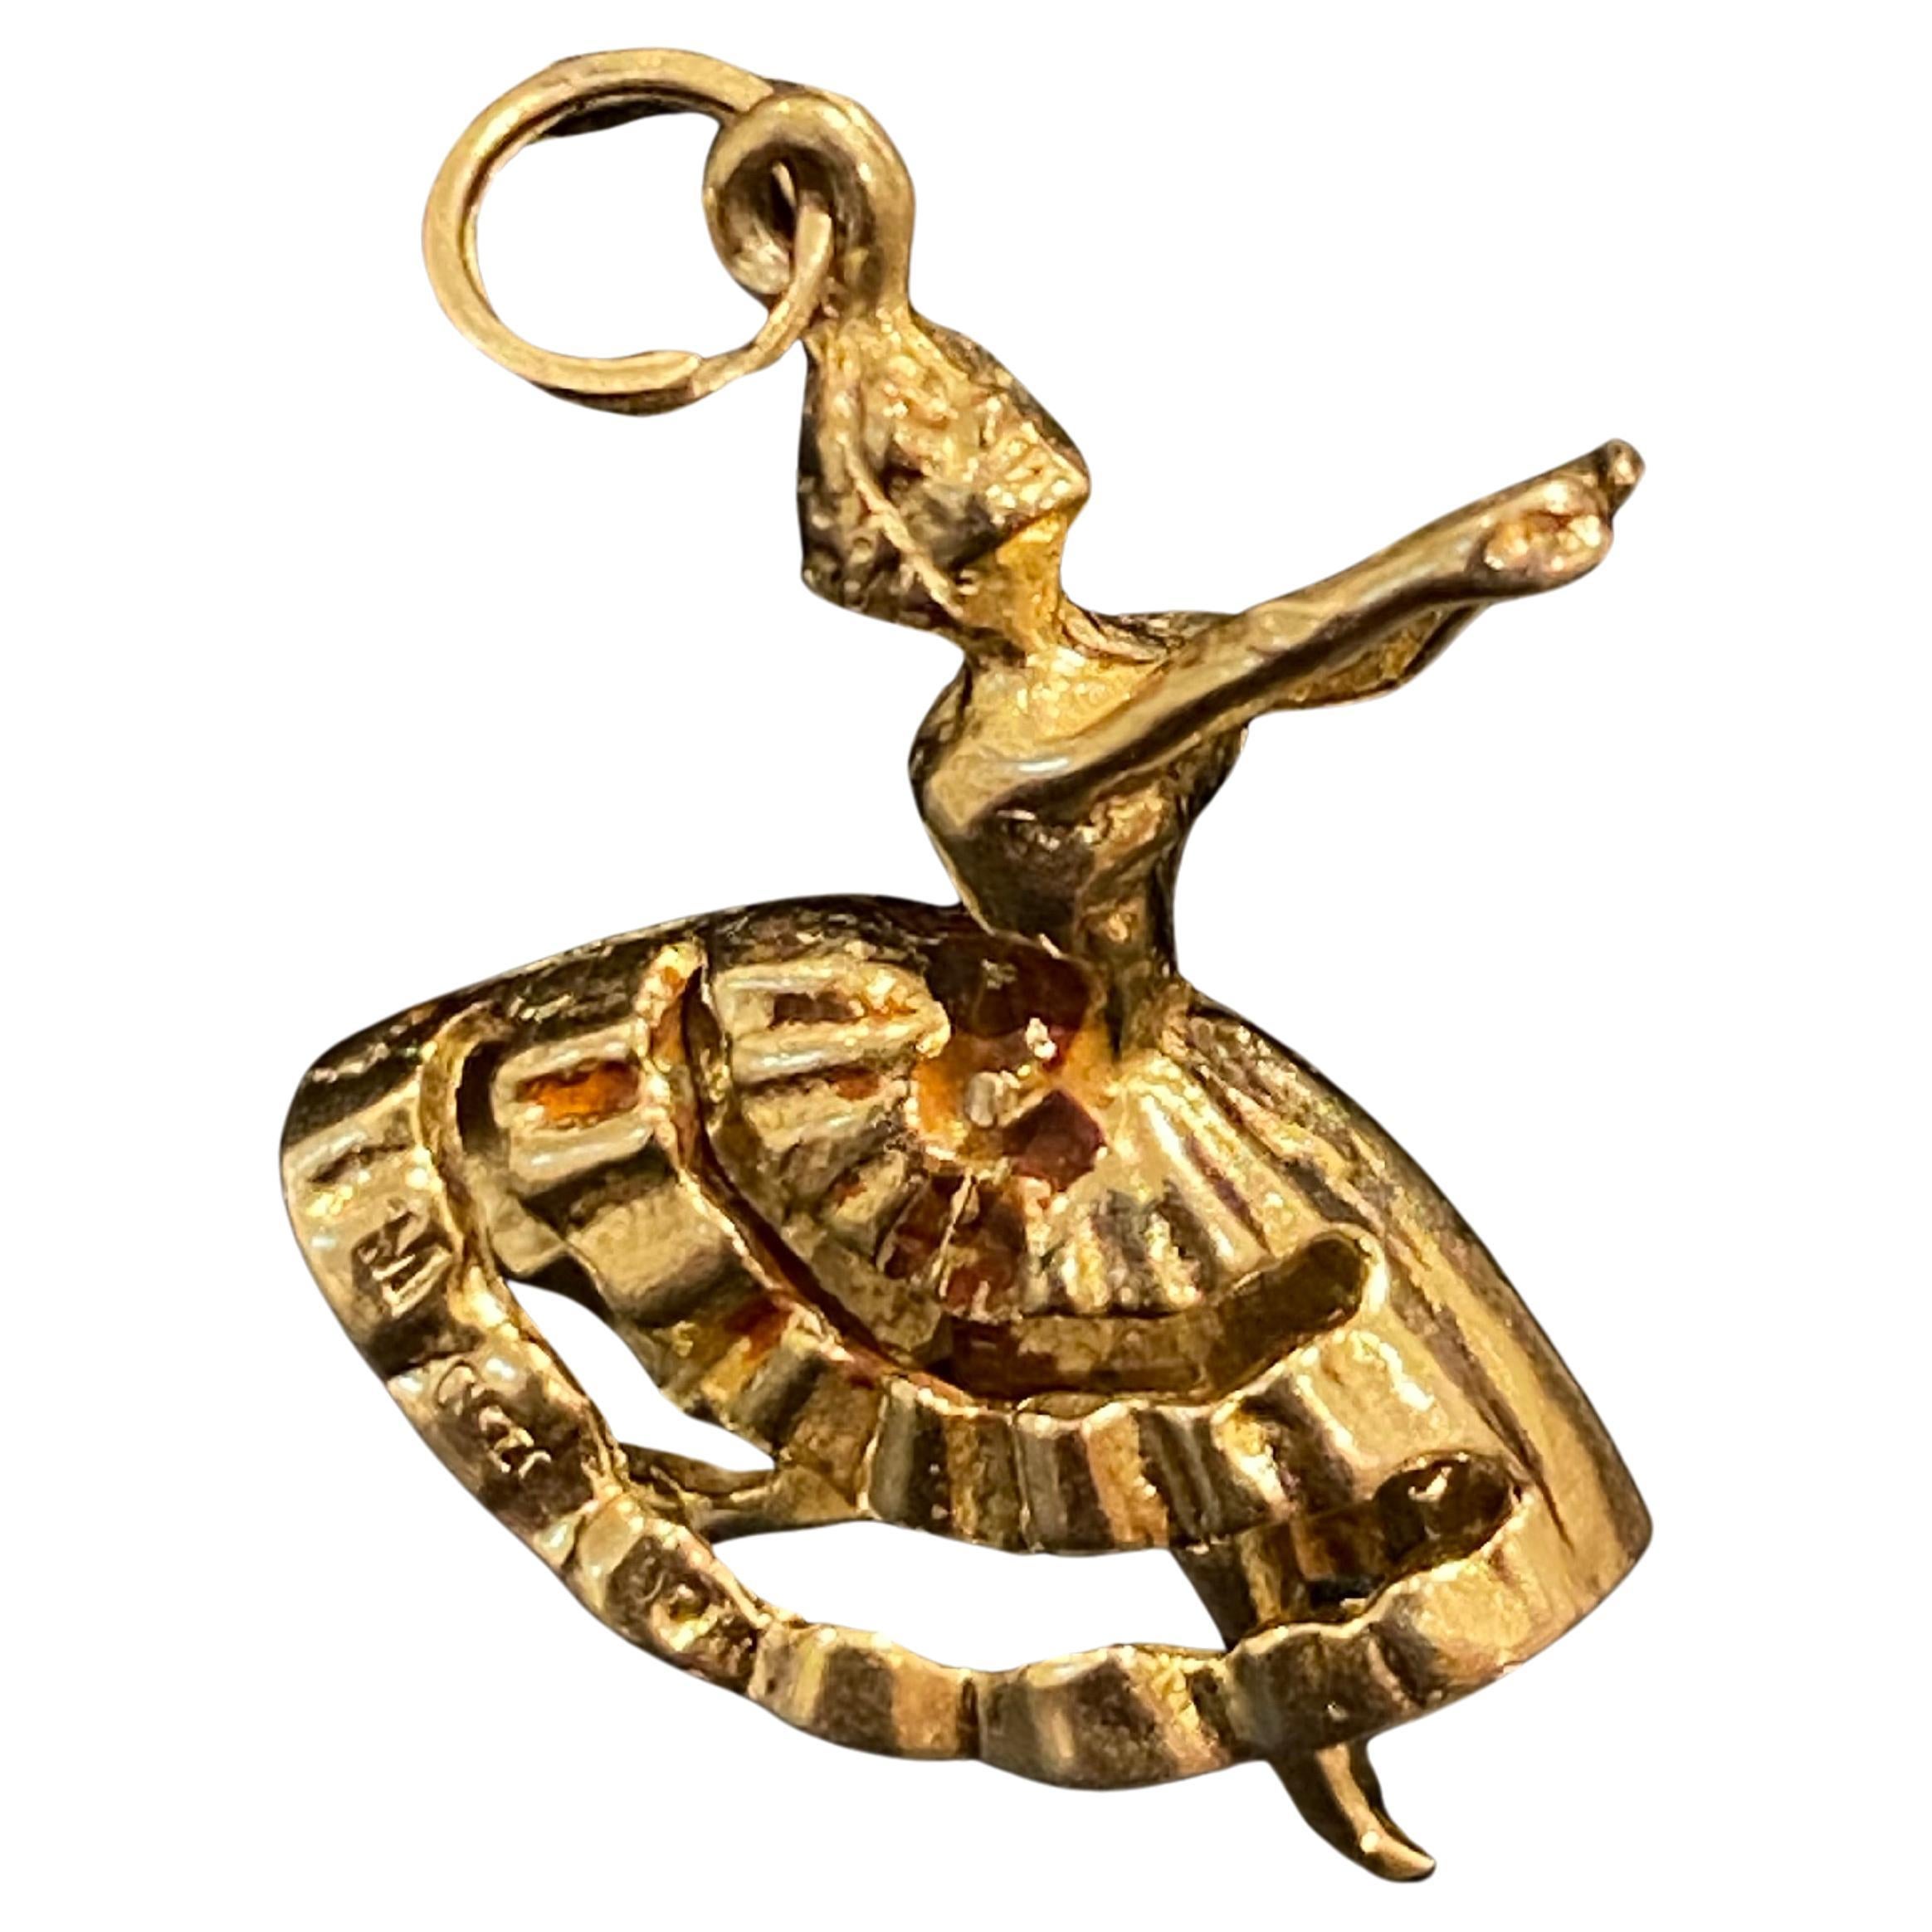 Superb 9K Yellow Gold Dancer / Ballerina with Moving Legs Charm. England, c1961. For Sale